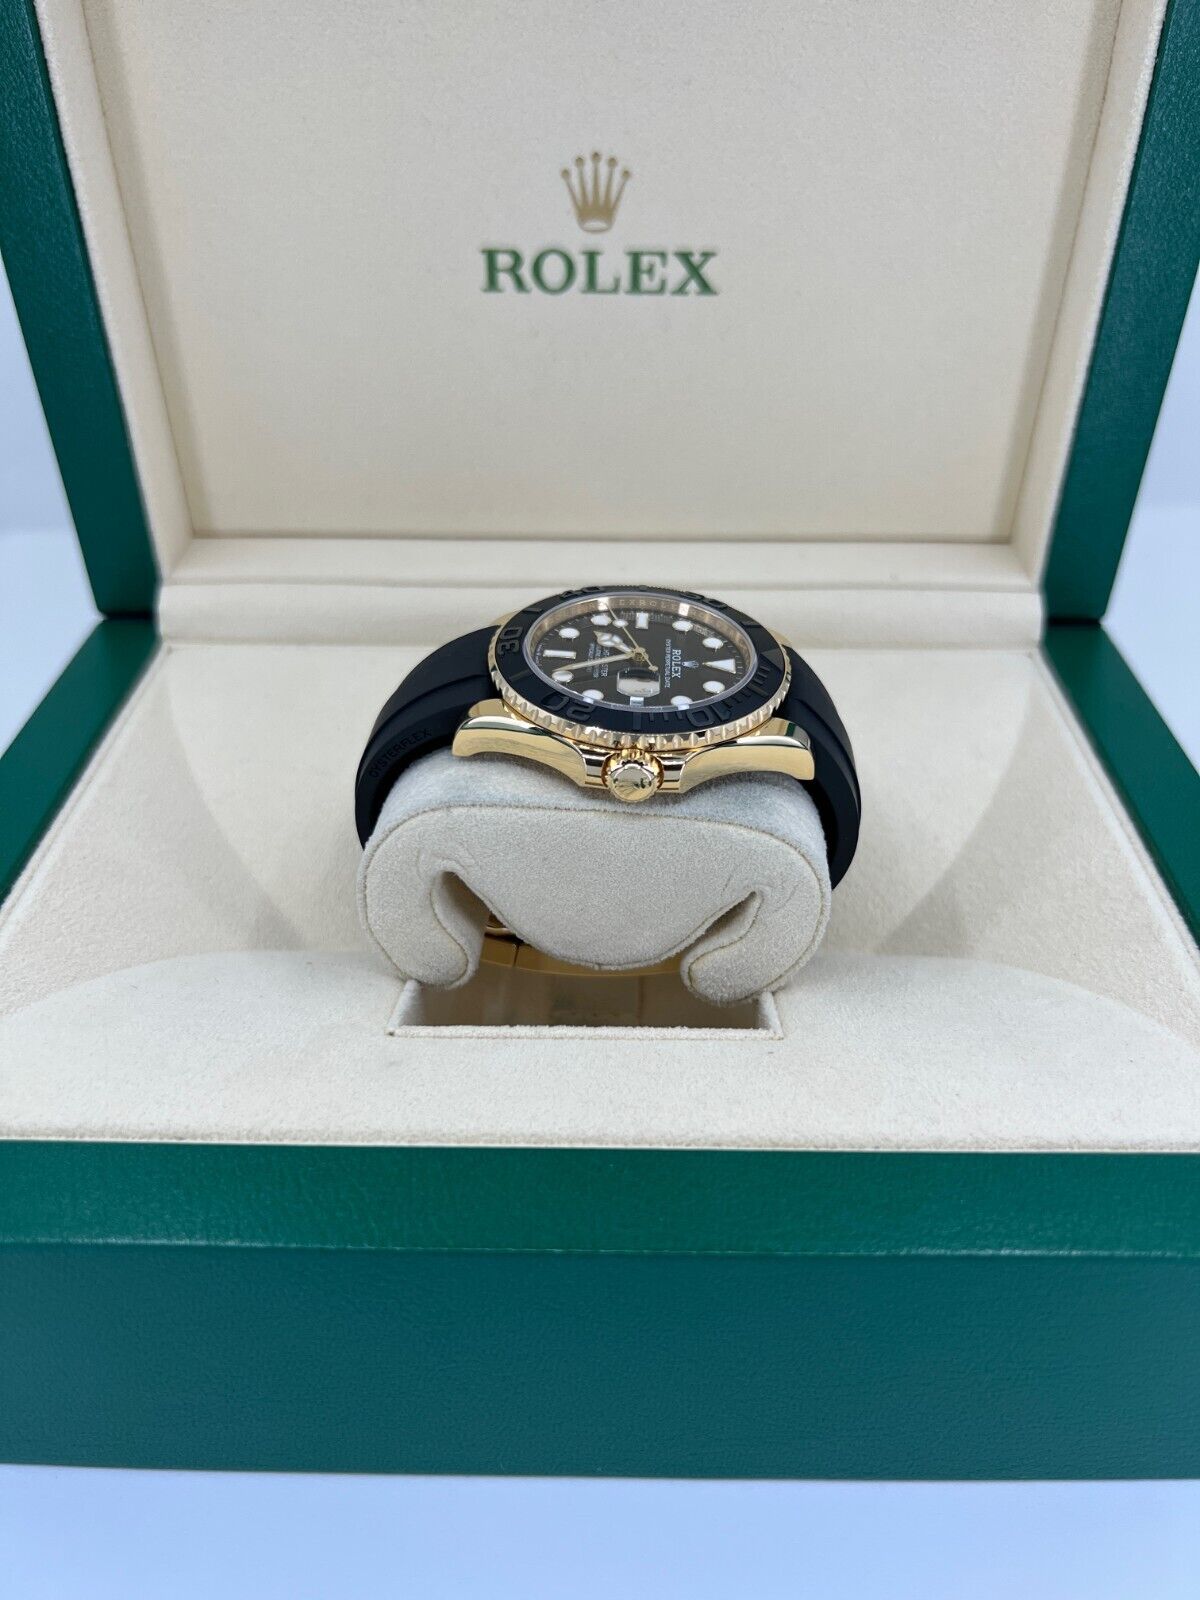 Rolex Yacht-Master 42mm, 18k Yellow Gold, Black Dial, Ref# 226658-0001, Right